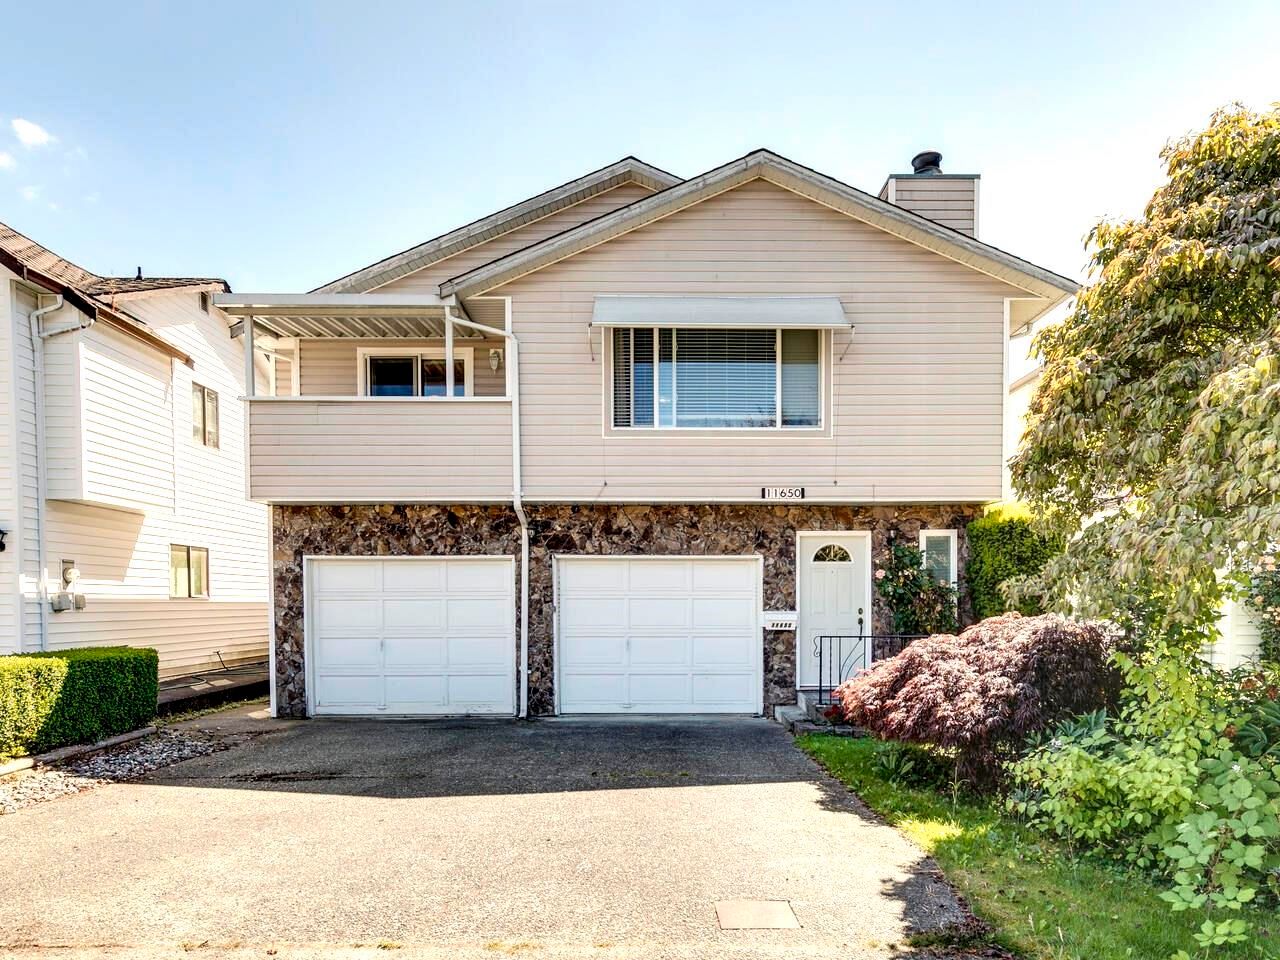 Open House on Sunday, November 6, 2022 11:00AM - 1:00PM
This is a MUST SEE &amp; has to be one of the best buys in Maple Ridge. Great home with a great setting and a great South-West Maple Ridge location.  See for yourself.  You'll be very glad you did!